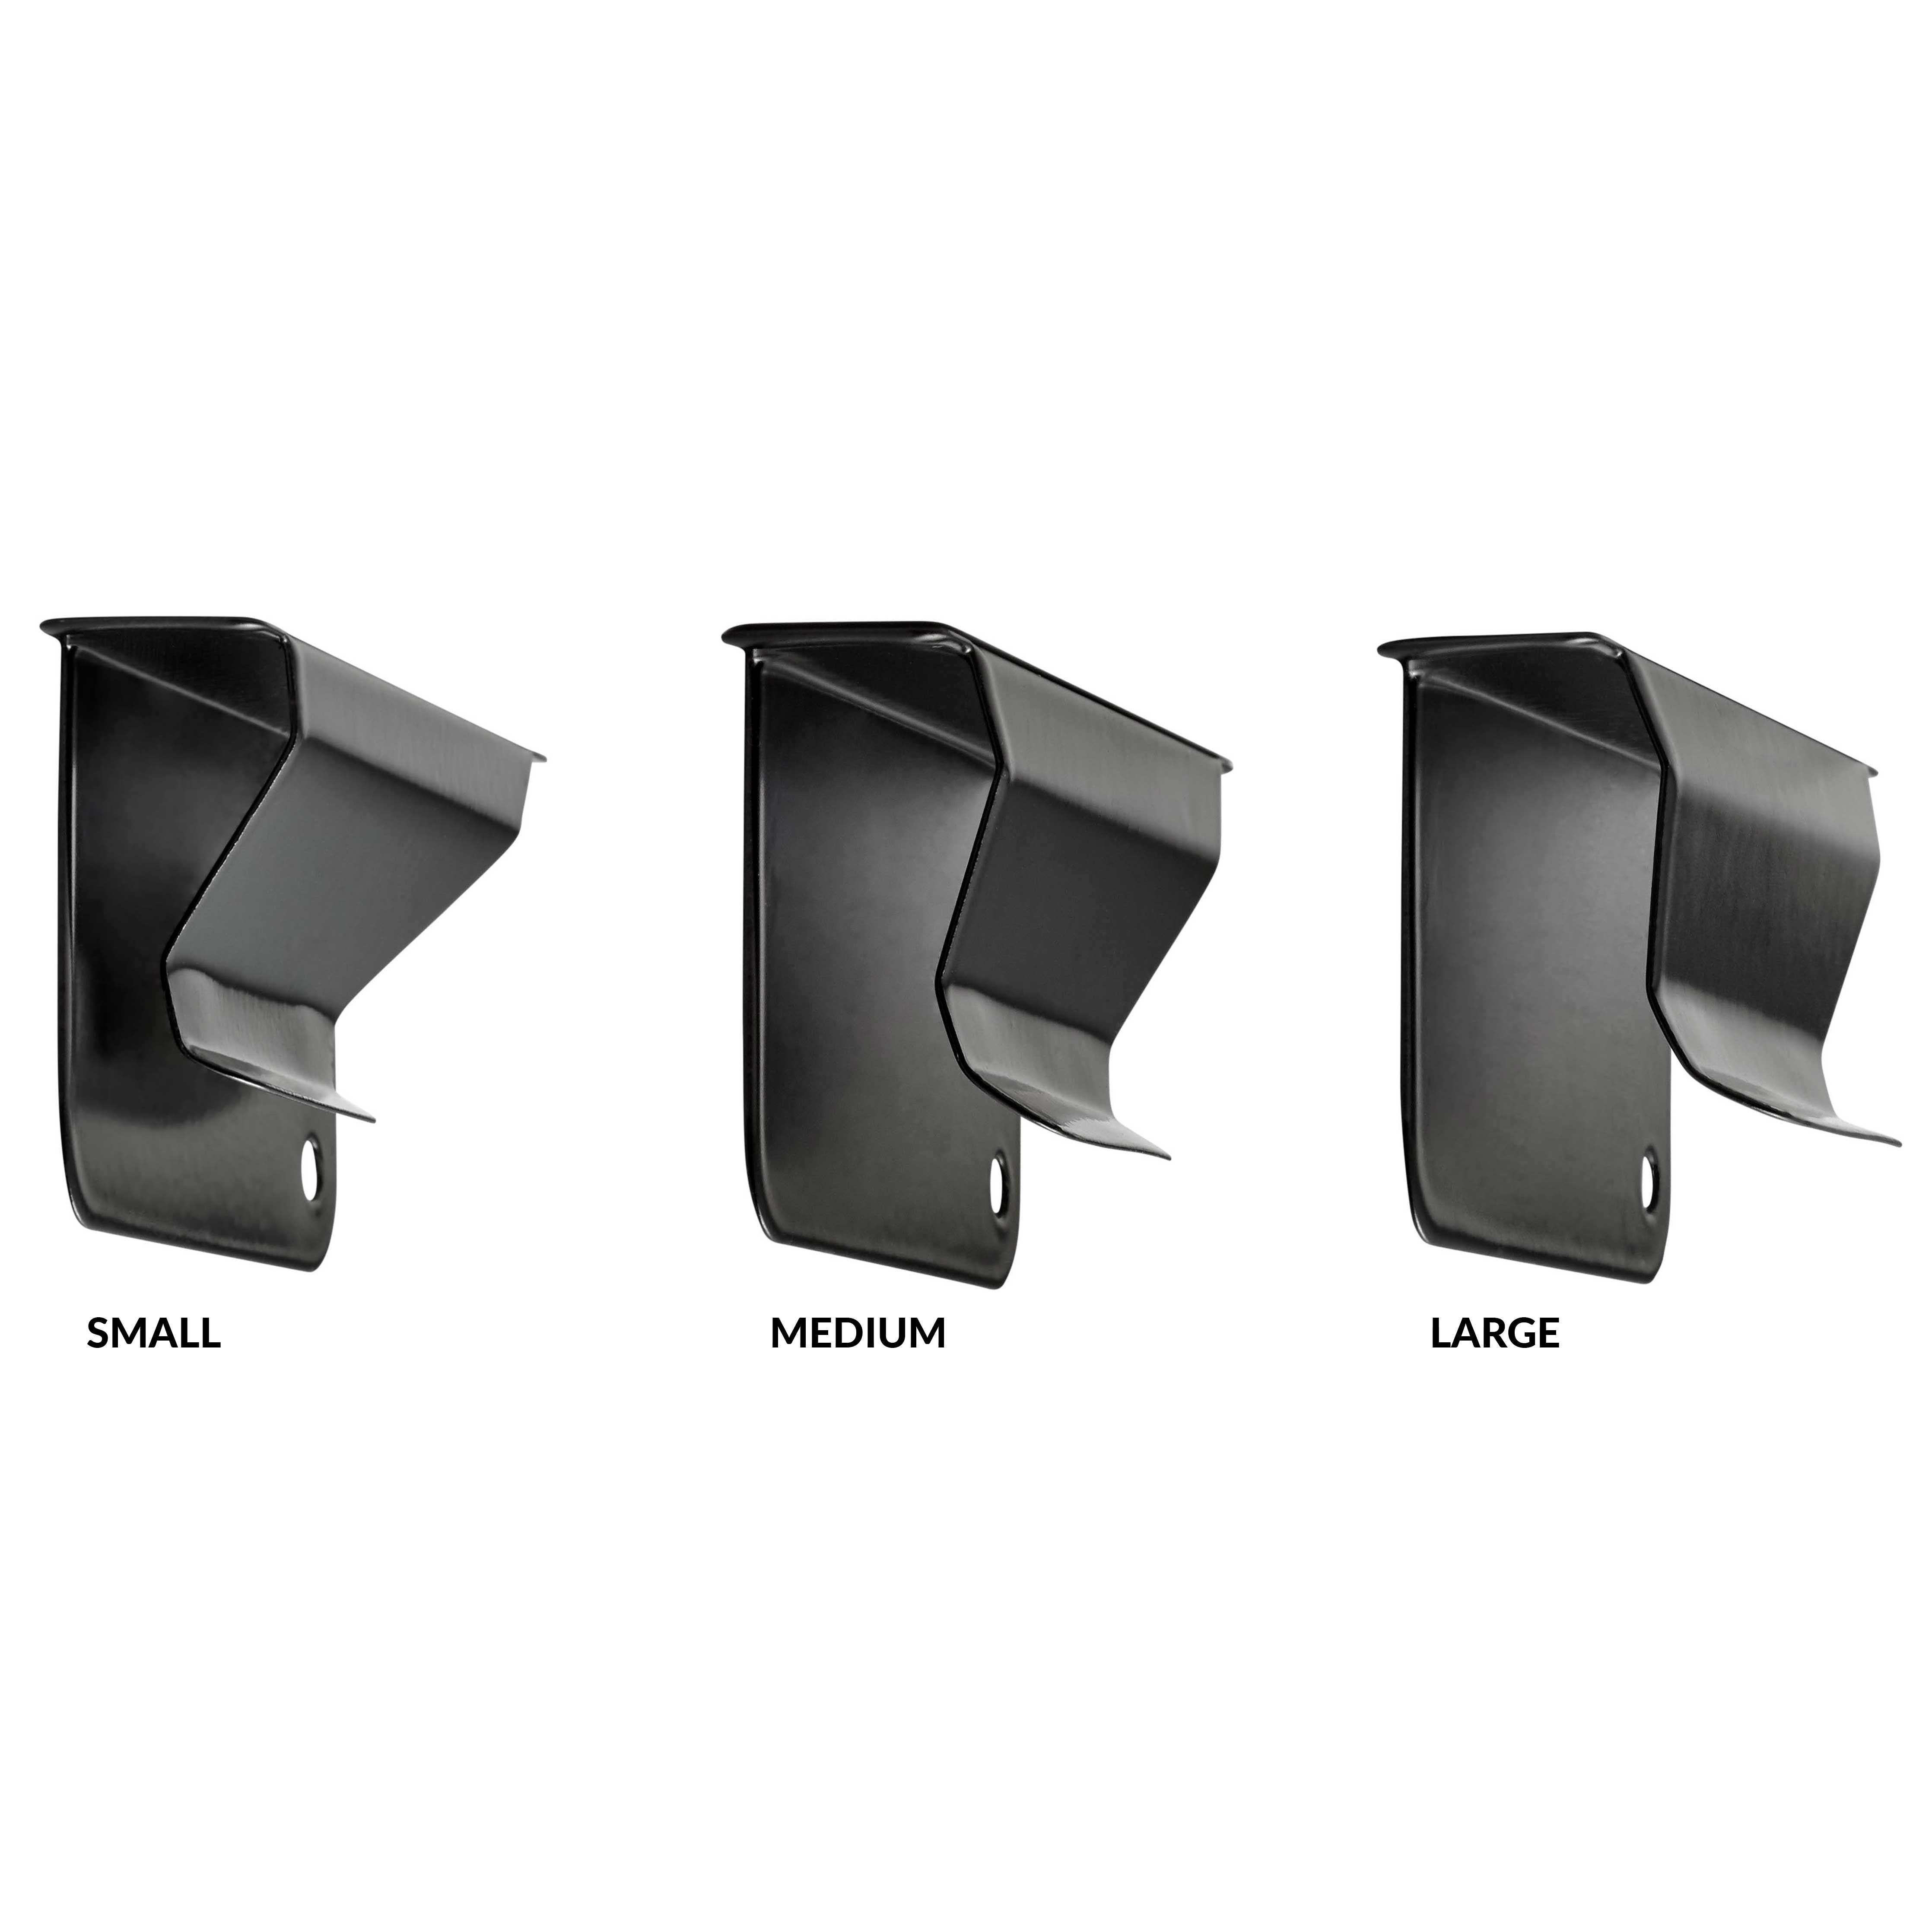 Side View of Drawer Bin Clip in 3 Sizes